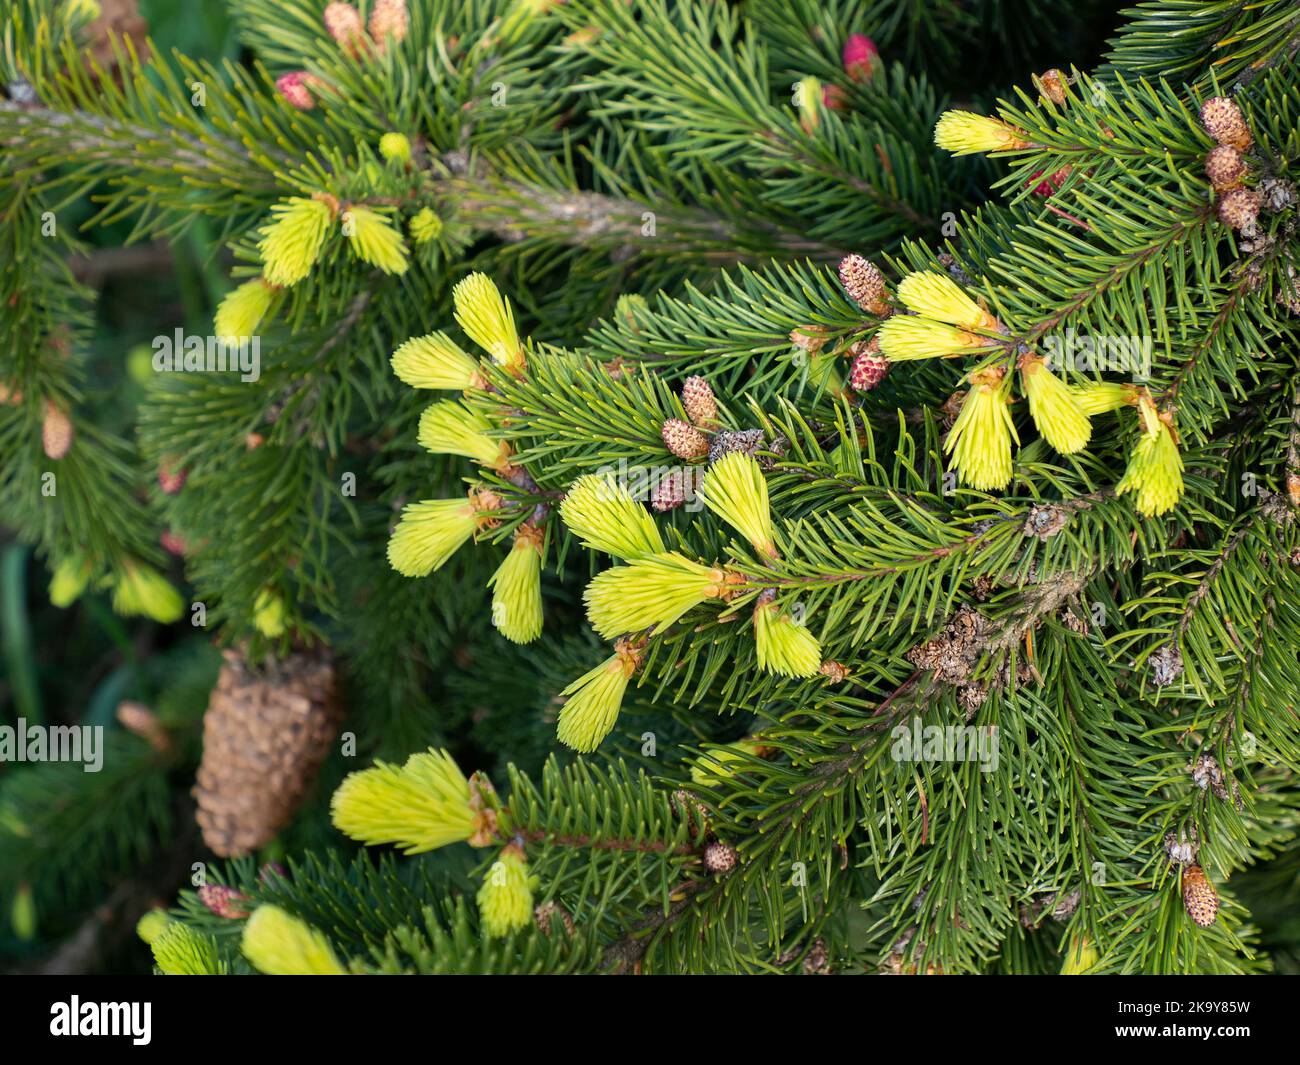 Picea abies, the Norway spruce or European spruce, young male spikelets and needles Stock Photo